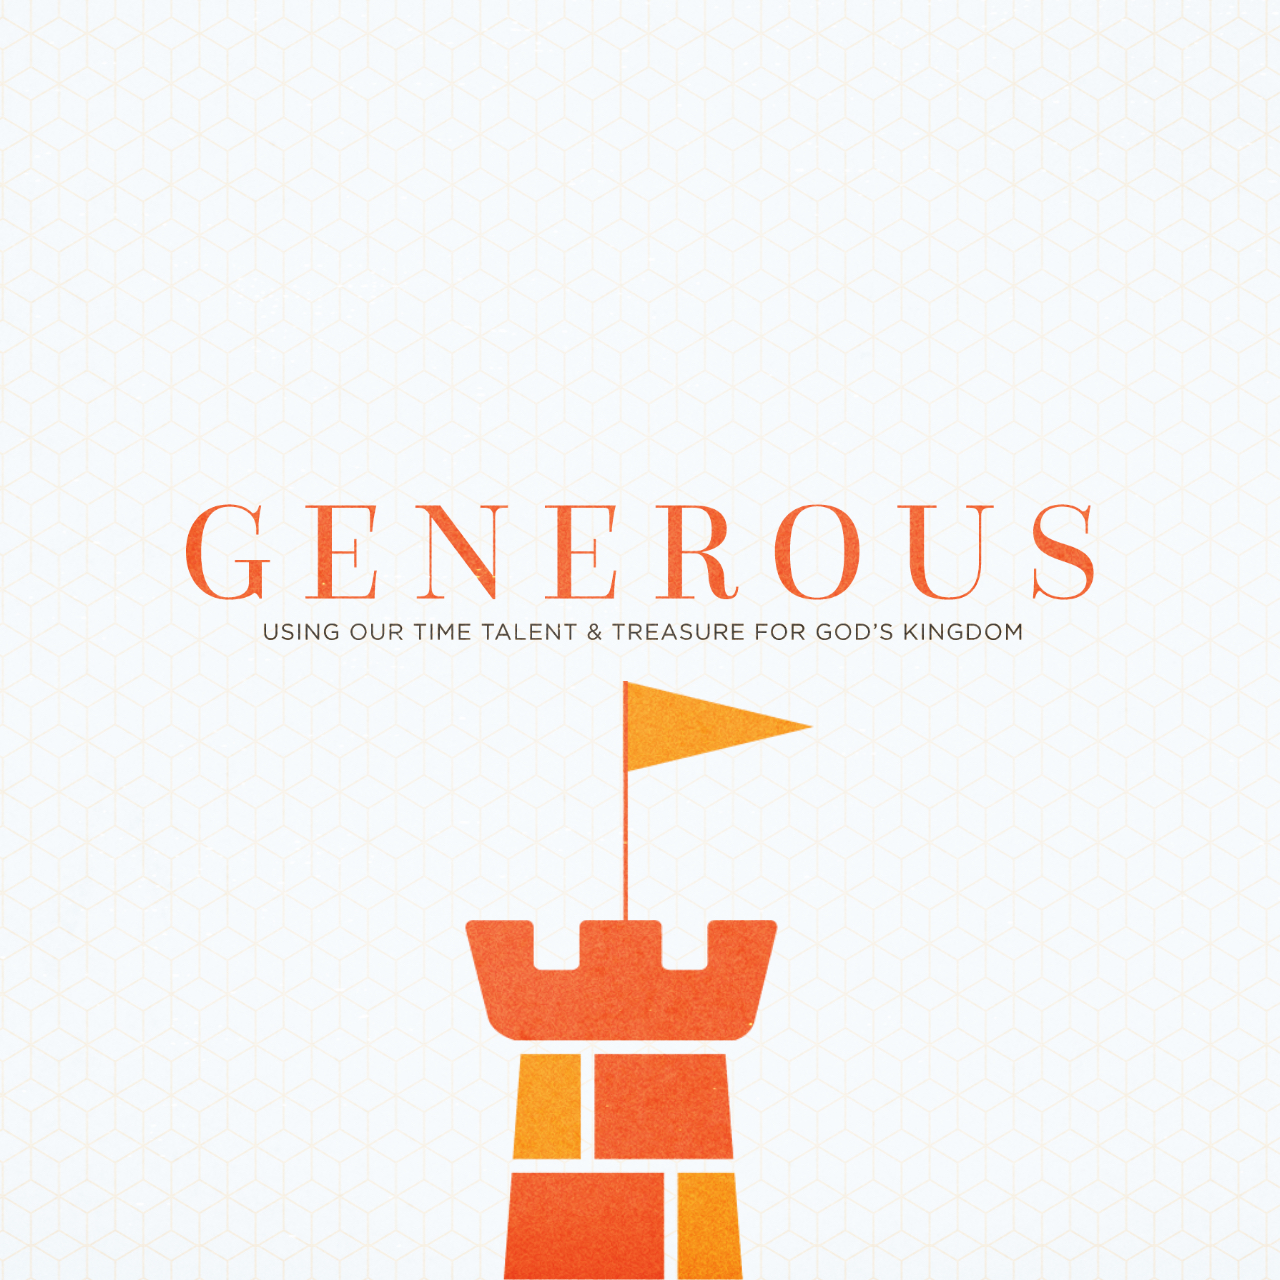 Generous: Why Do We Give, How Do We Give?